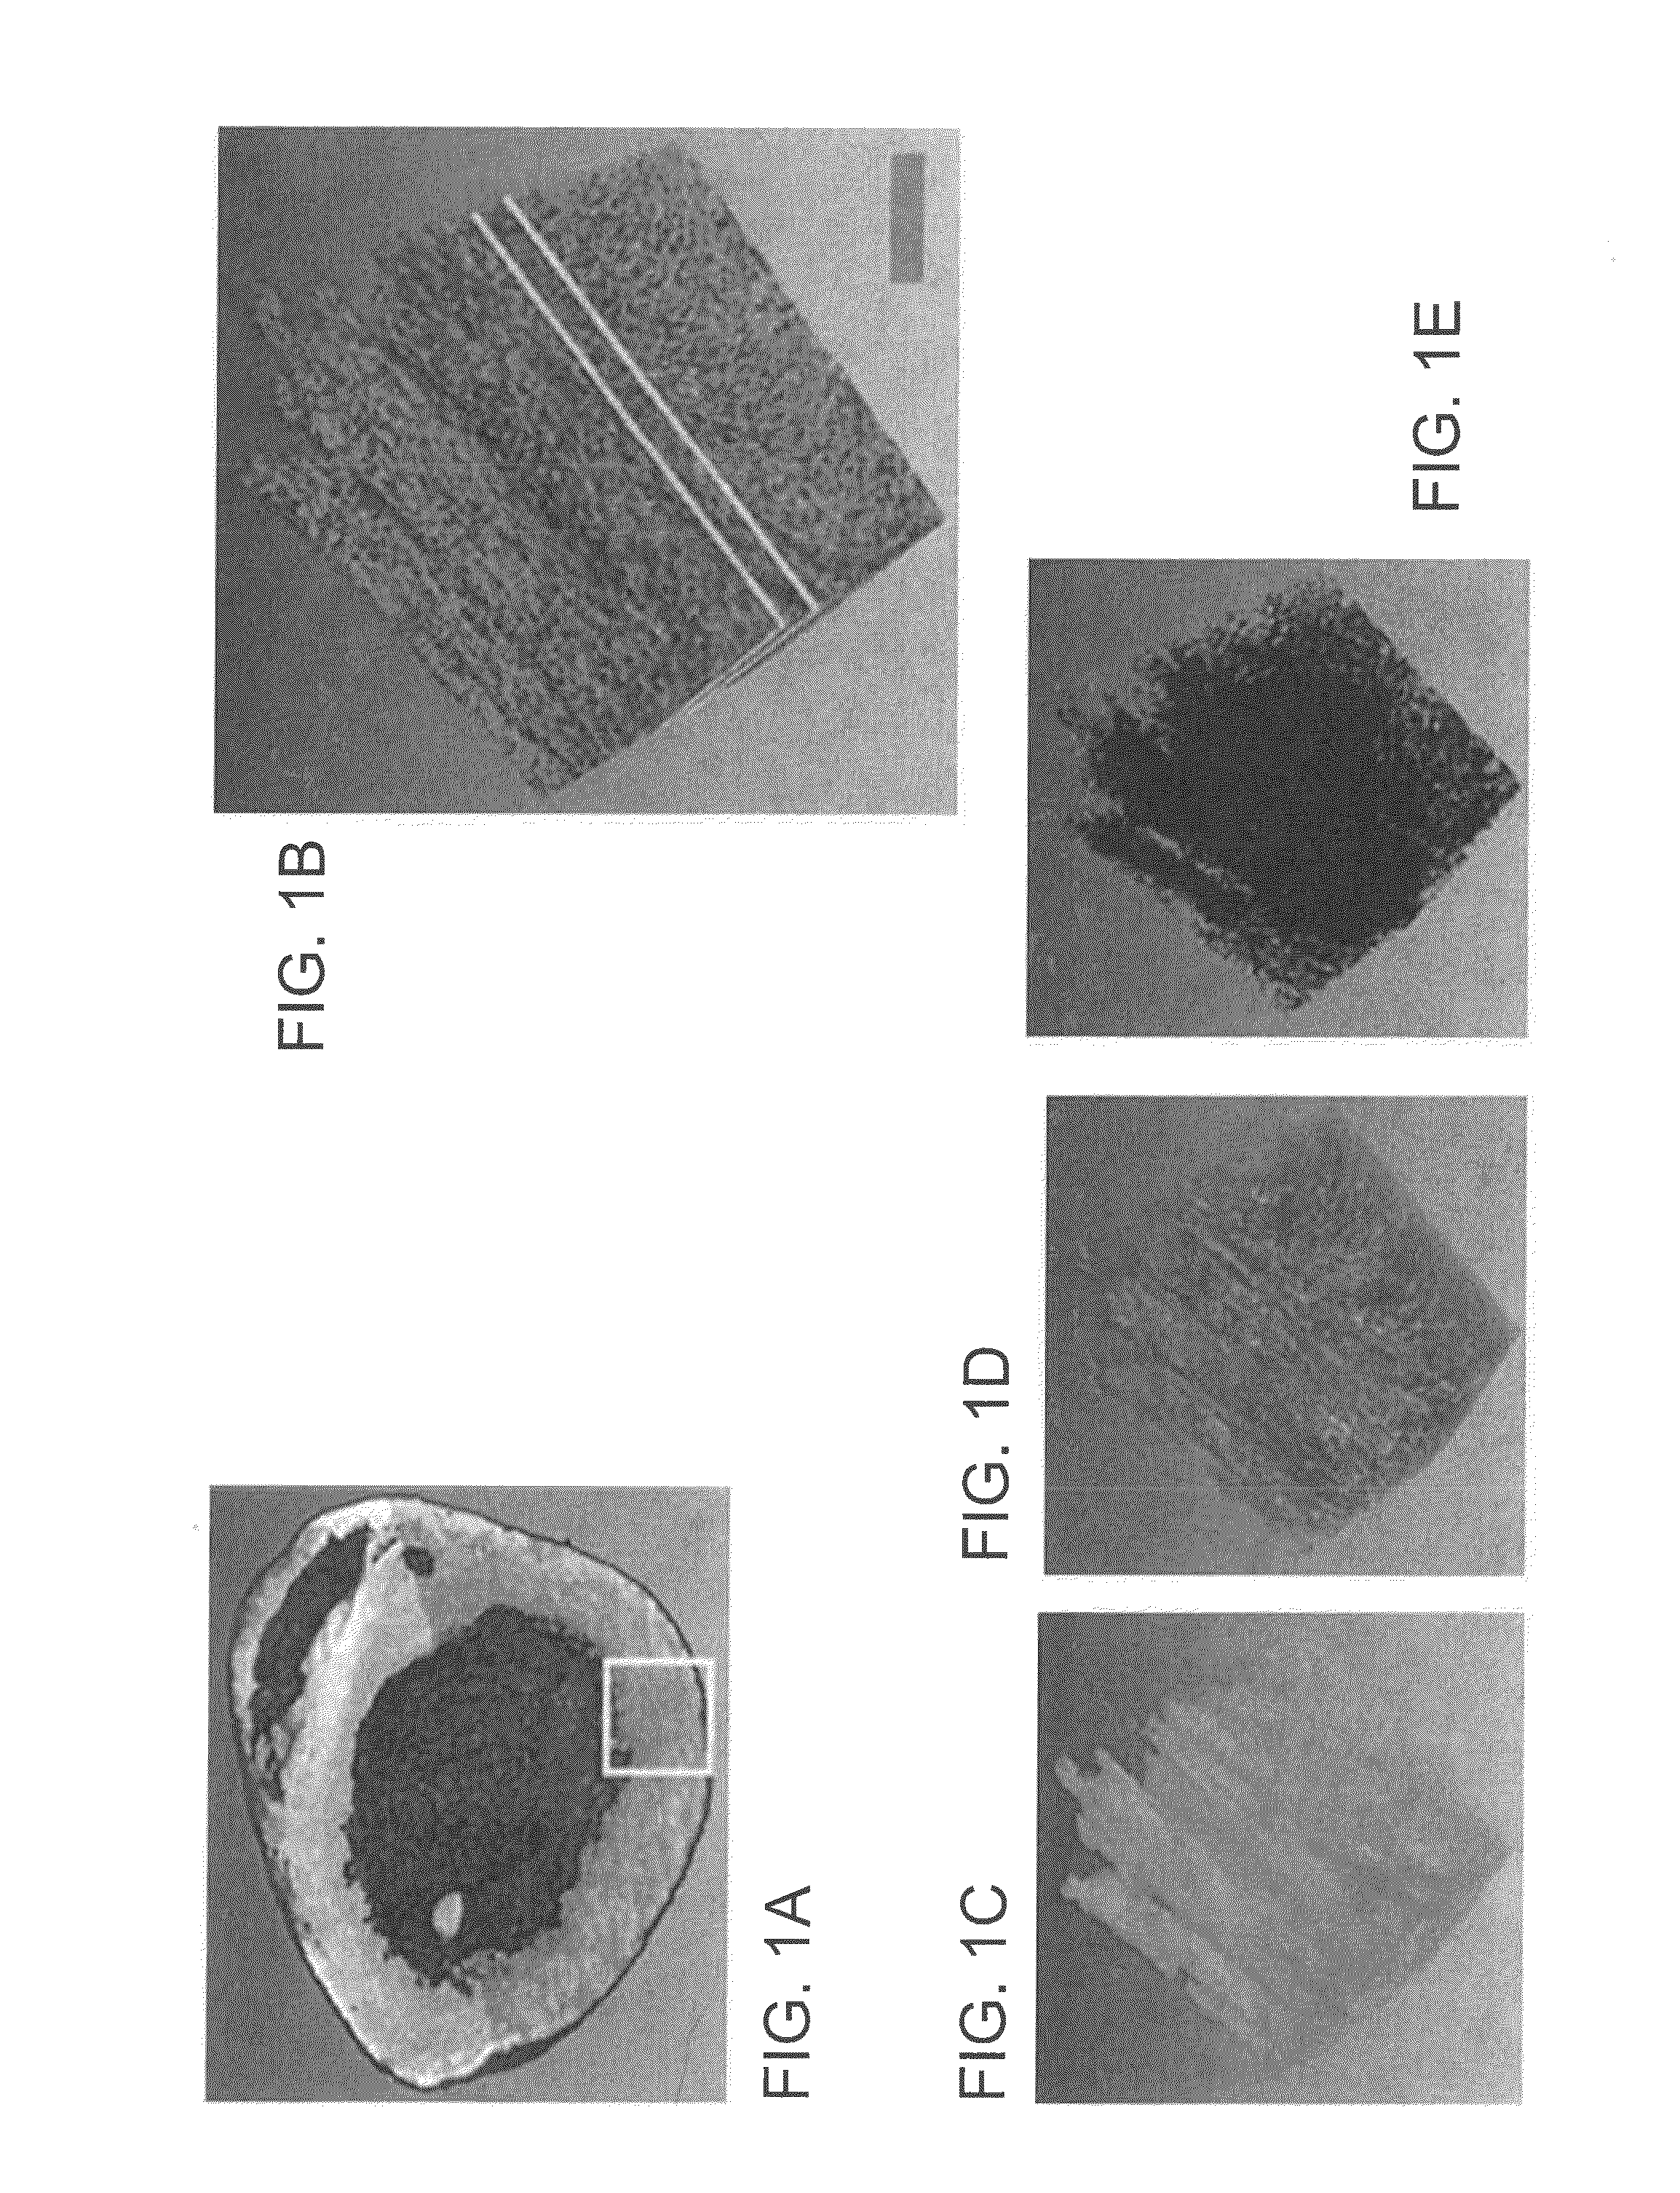 Systems and methods for imaging and processing tissue